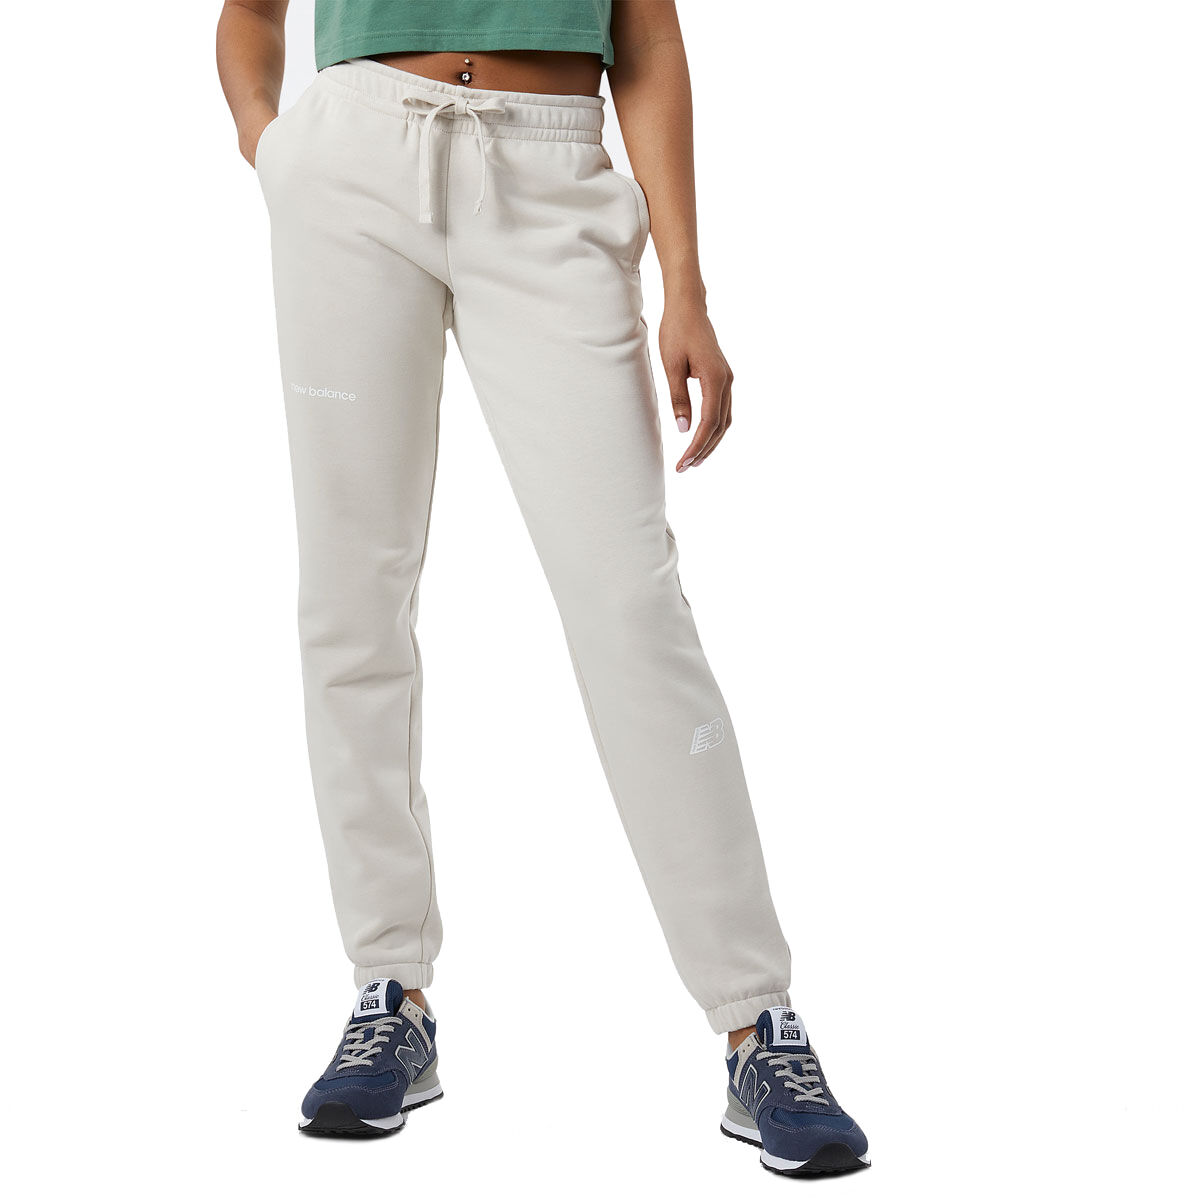 NEW BALANCE - Women's essential sporty trousers 